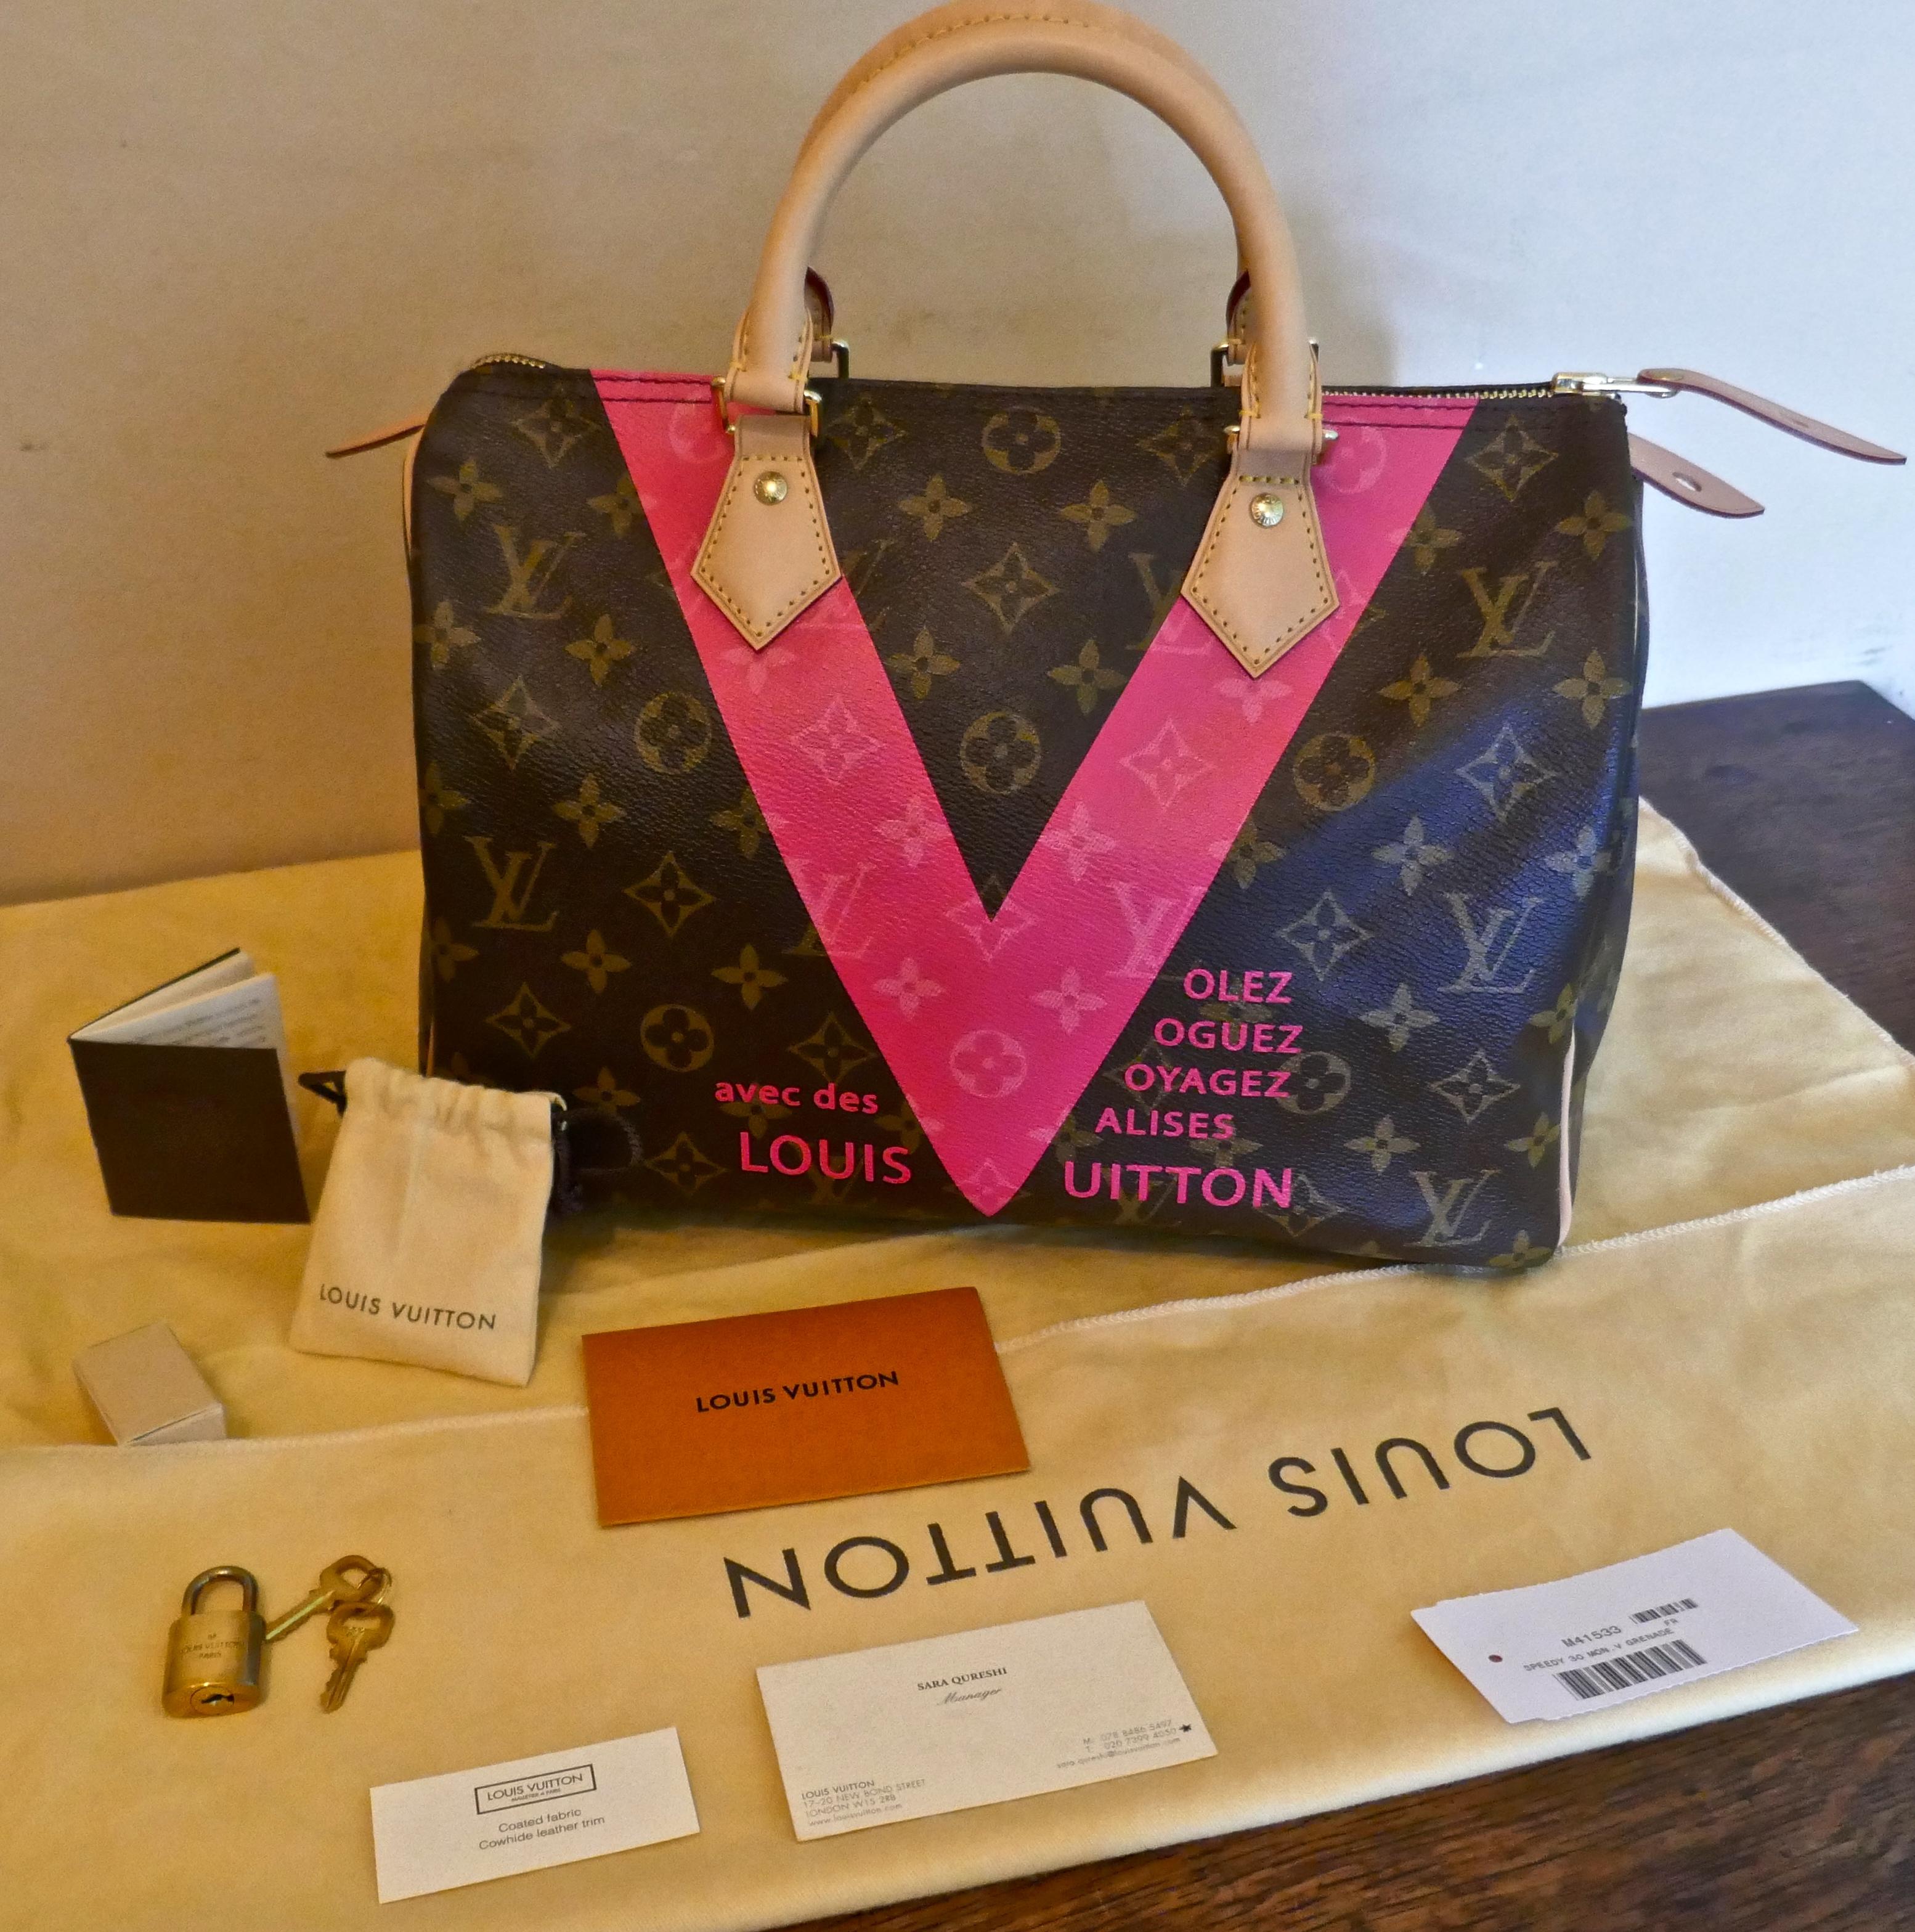 Louis Vuitton Speedy 30 Limited Edition Grenade V Monogram Handbag.

Louis Vuitton Speedy 30 limited edition handbag with grenade pink “V” on iconic brown Monogram canvas from the 2015 Spring/Summer collection was inspired by the famous Louis